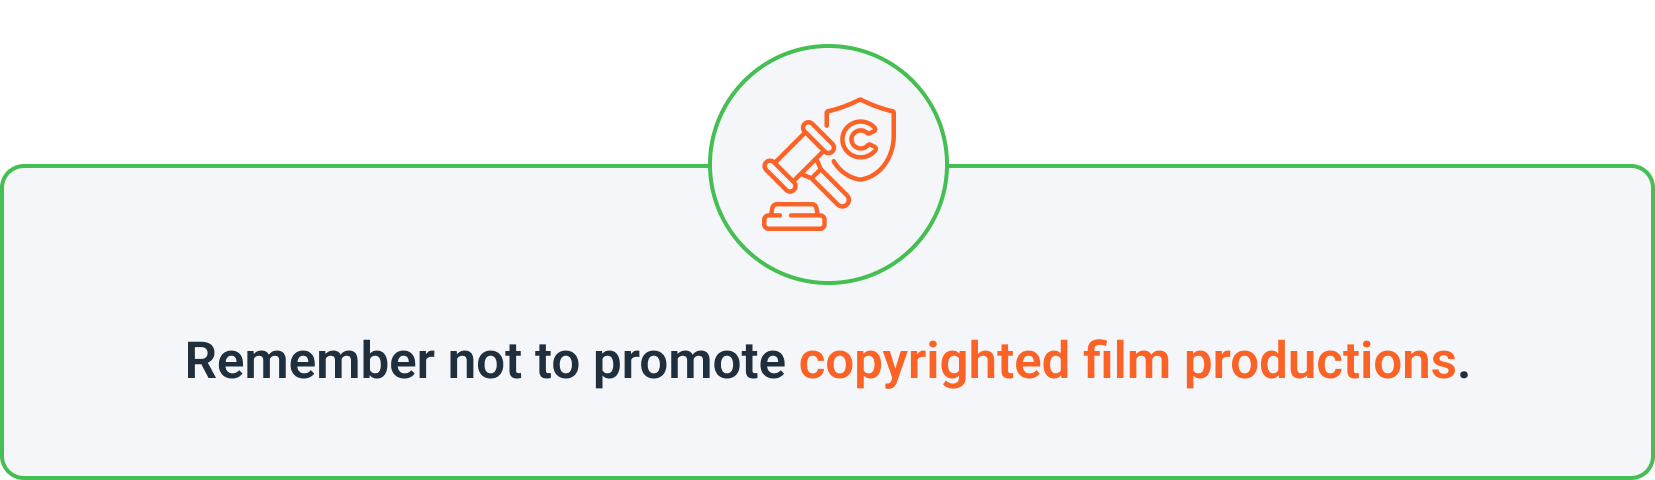 Remember not to promote copyrighted film productions.